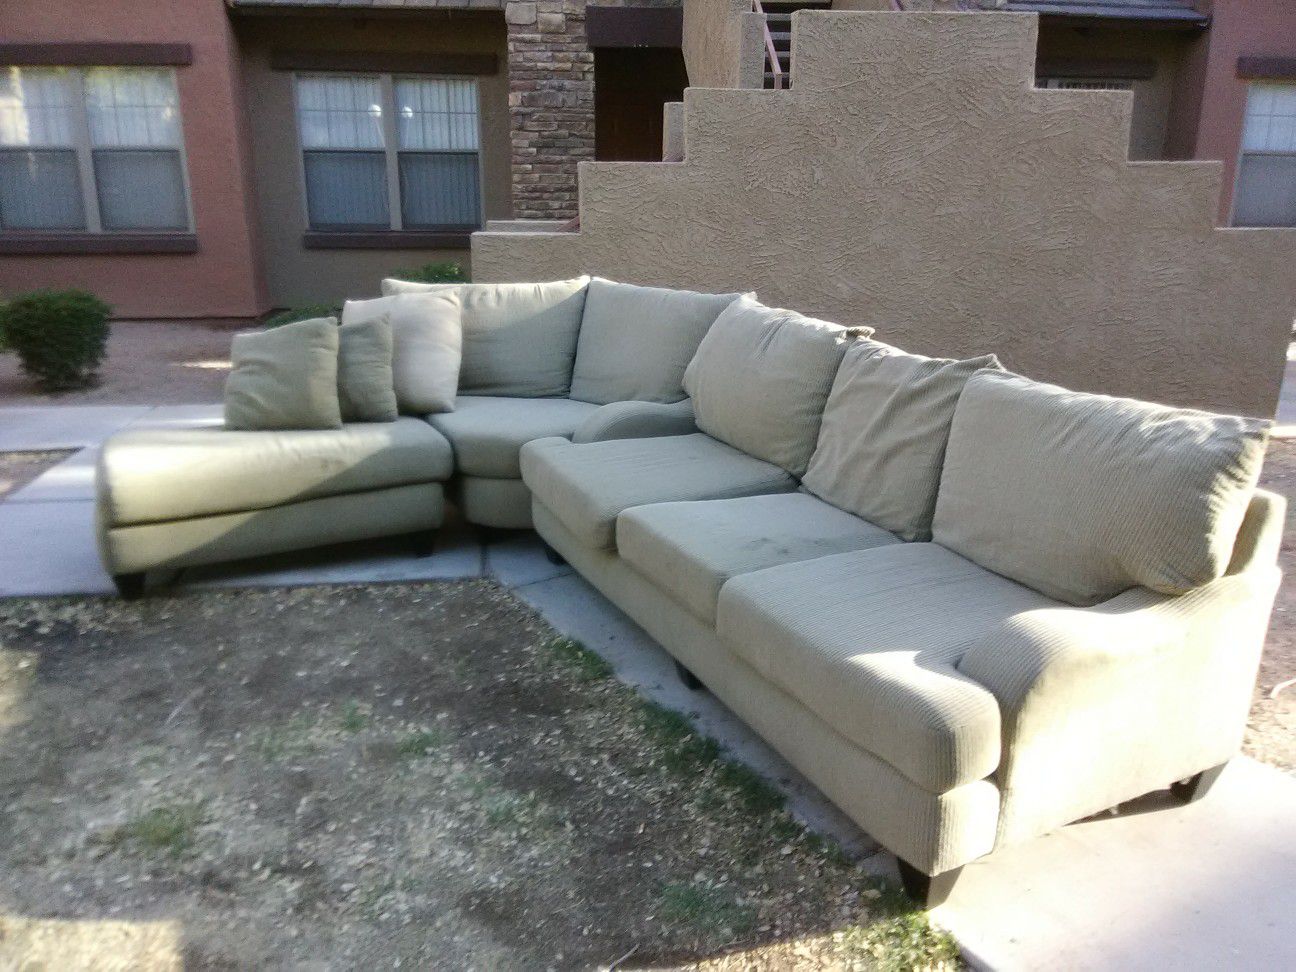 Large 3-piece sectional couch